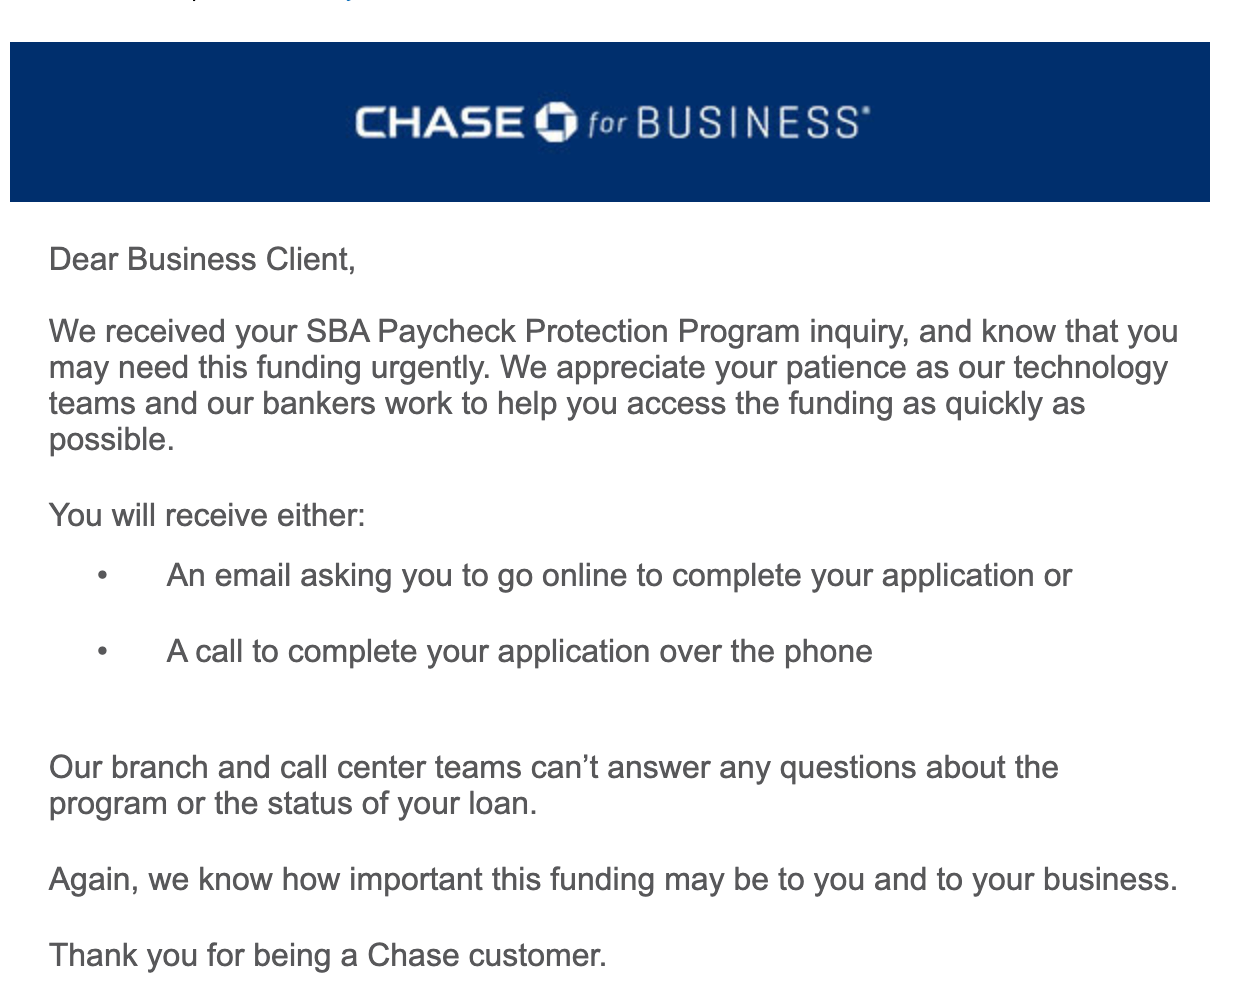 Chase email after initial info